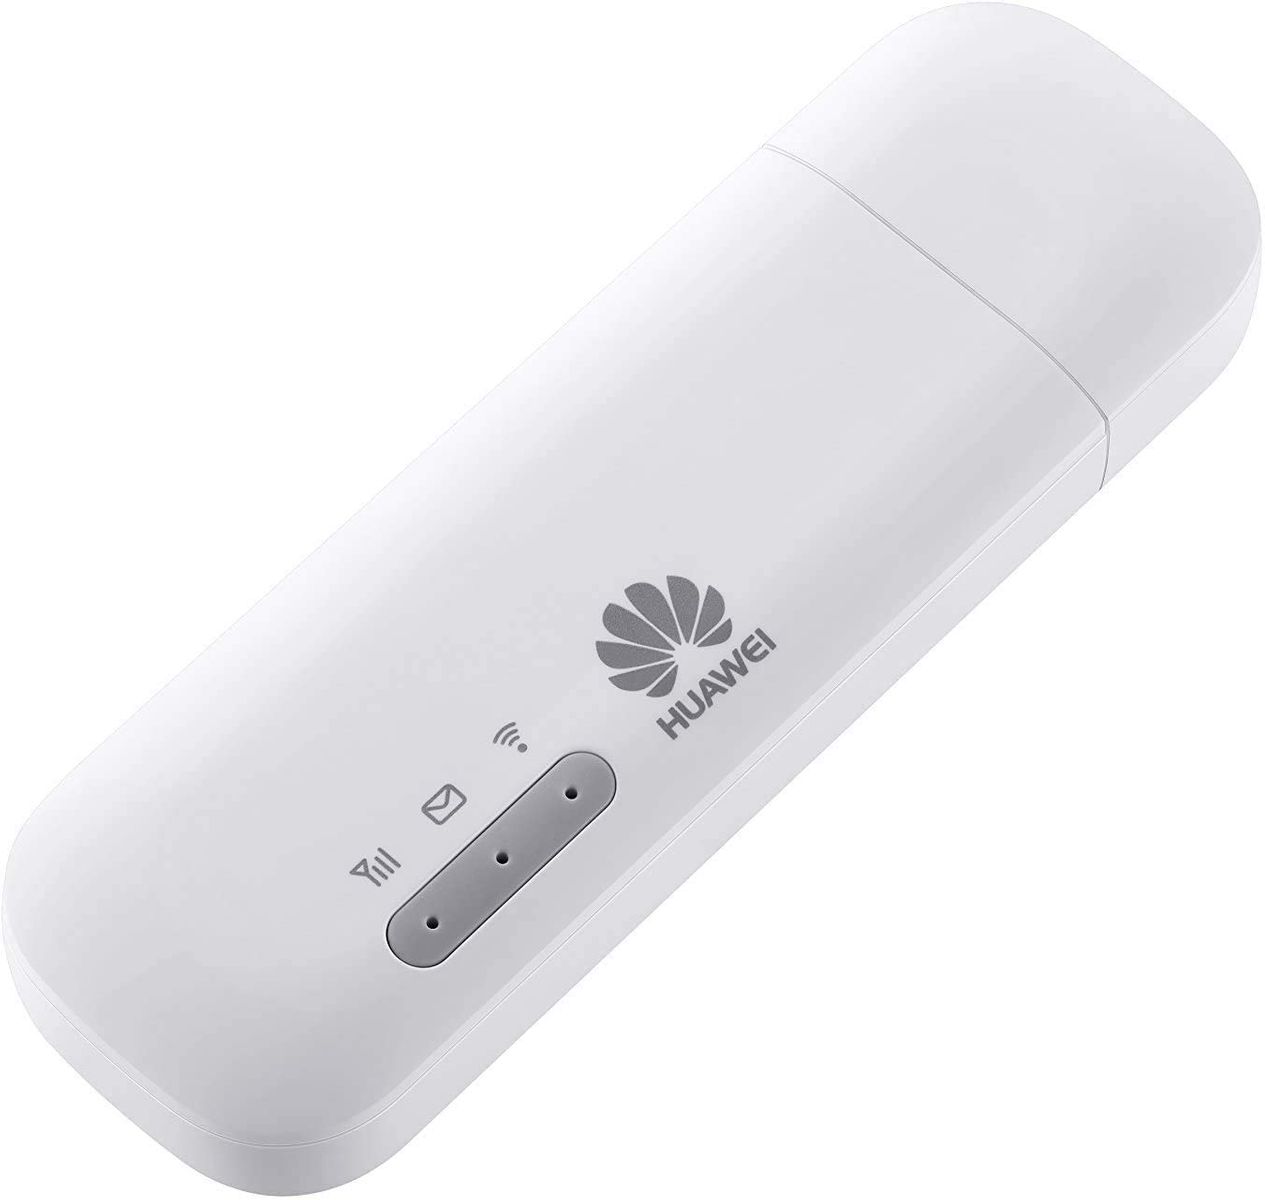 HUAWEI E8372h-320 LTE/4G 150Mbps Unlocked White USB Wireless Adapter works with SIM cards abroad 2020 Model